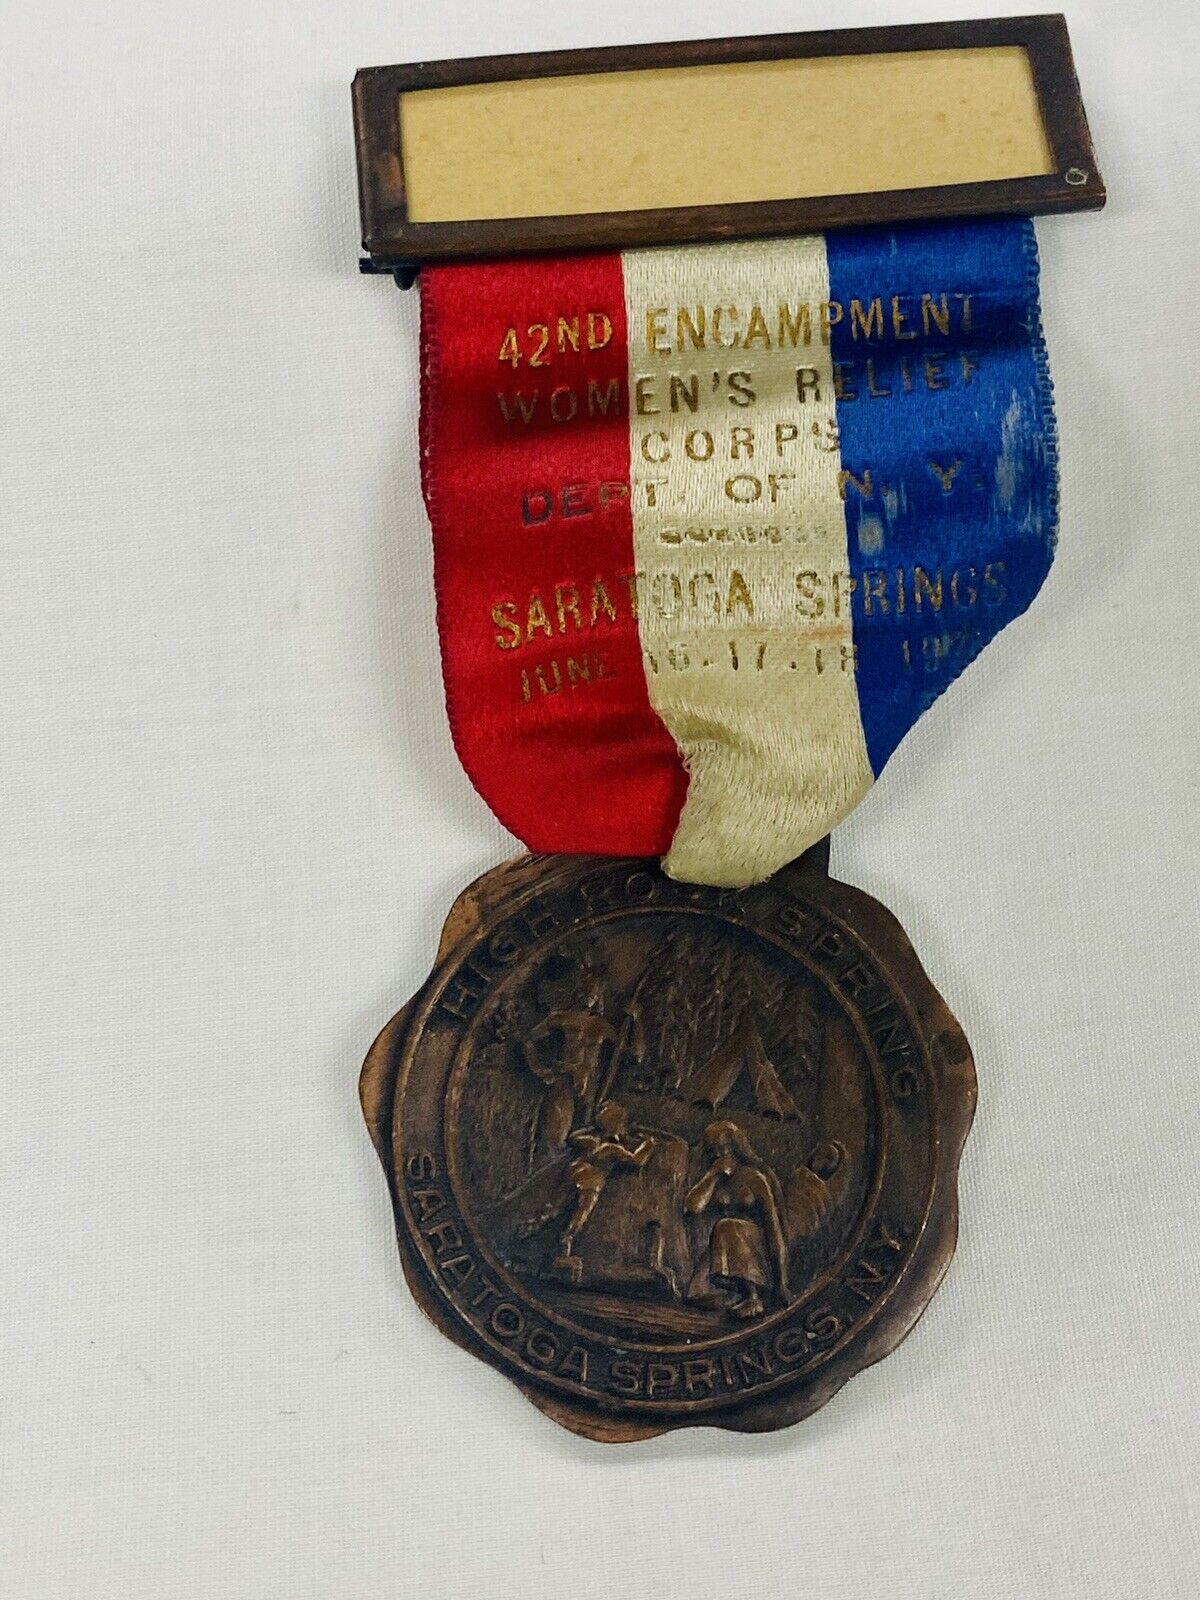 Saratoga Springs, NY 1925 Womens Relief Corps- 42nd Encampment Medal & Ribbon